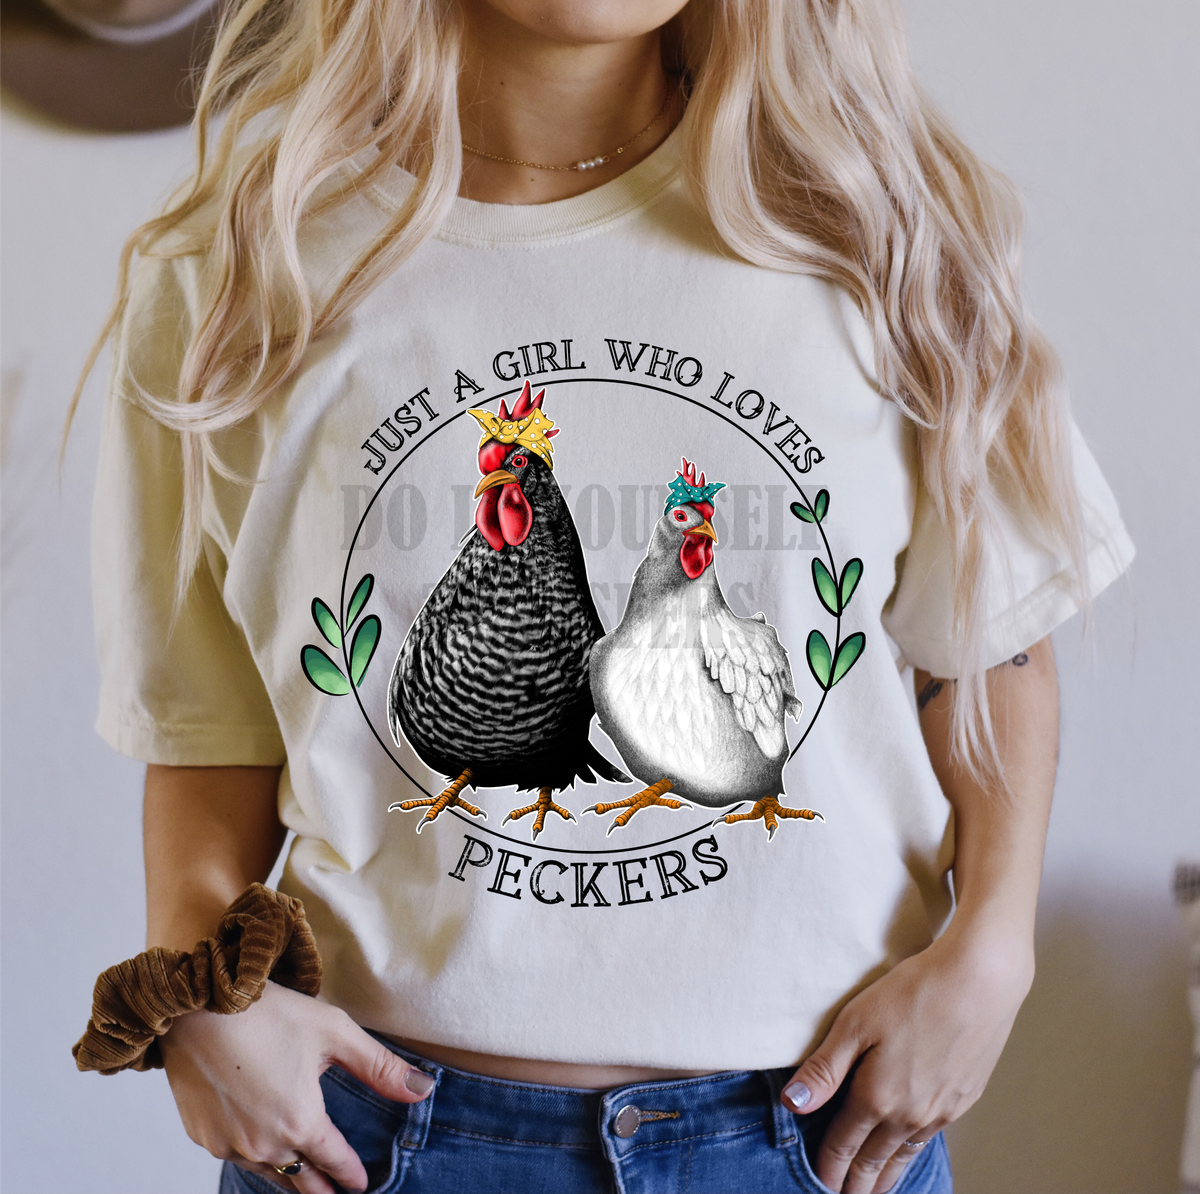 Just a girl who loves Peckers chickens farm  Adult size 10.7x10.7 DTF TRANSFERPRINT TO ORDER